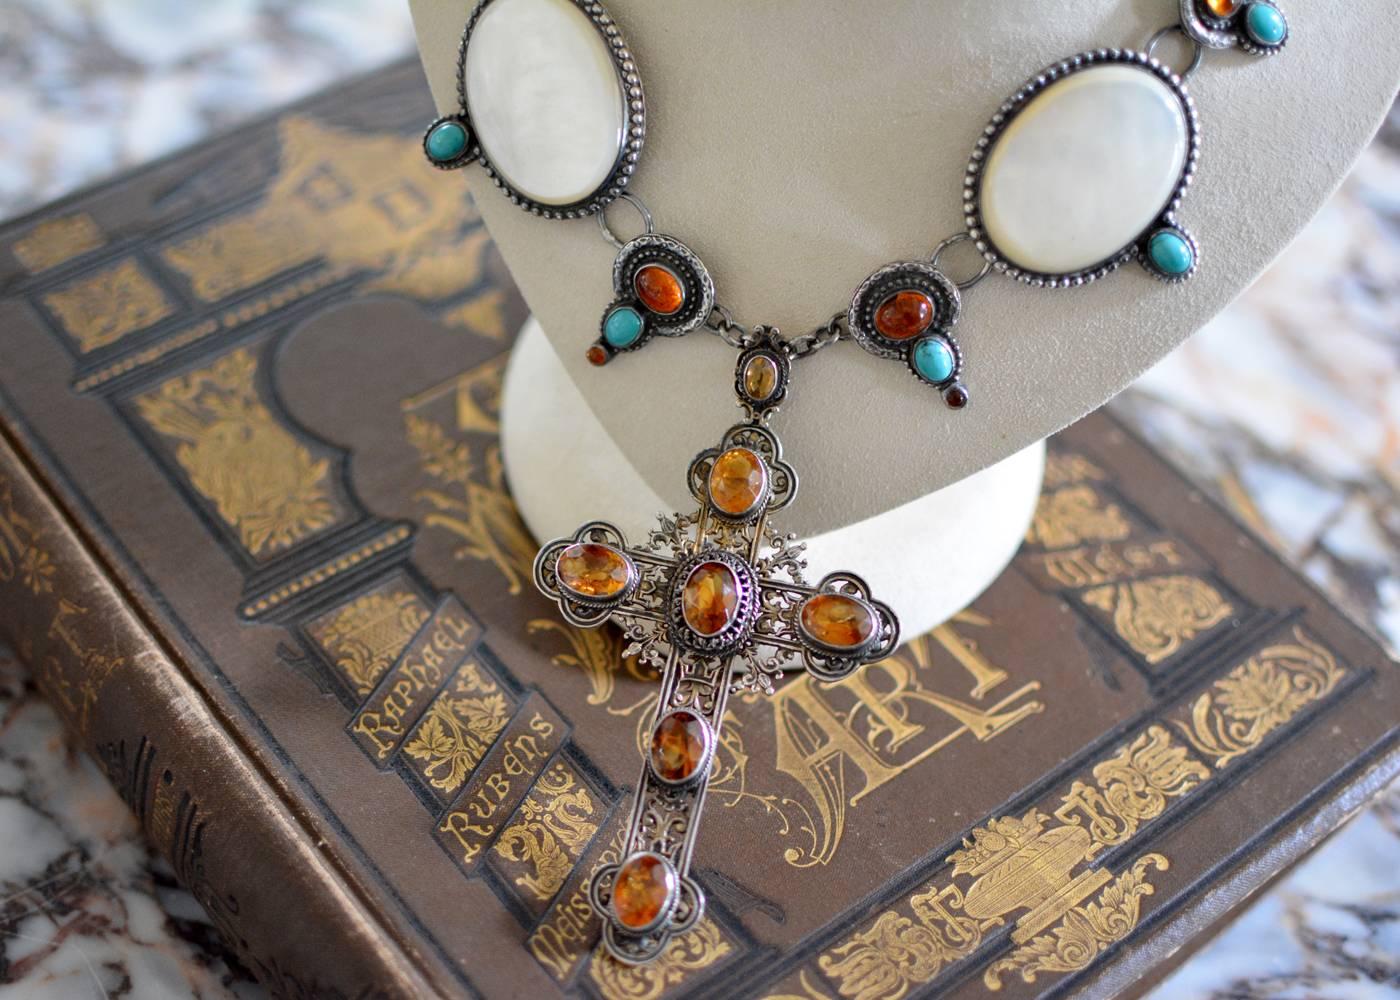 Women's or Men's Jill Garber Rococo Cross Necklace with Citrine, Mother-of-Pearl and Turquoise